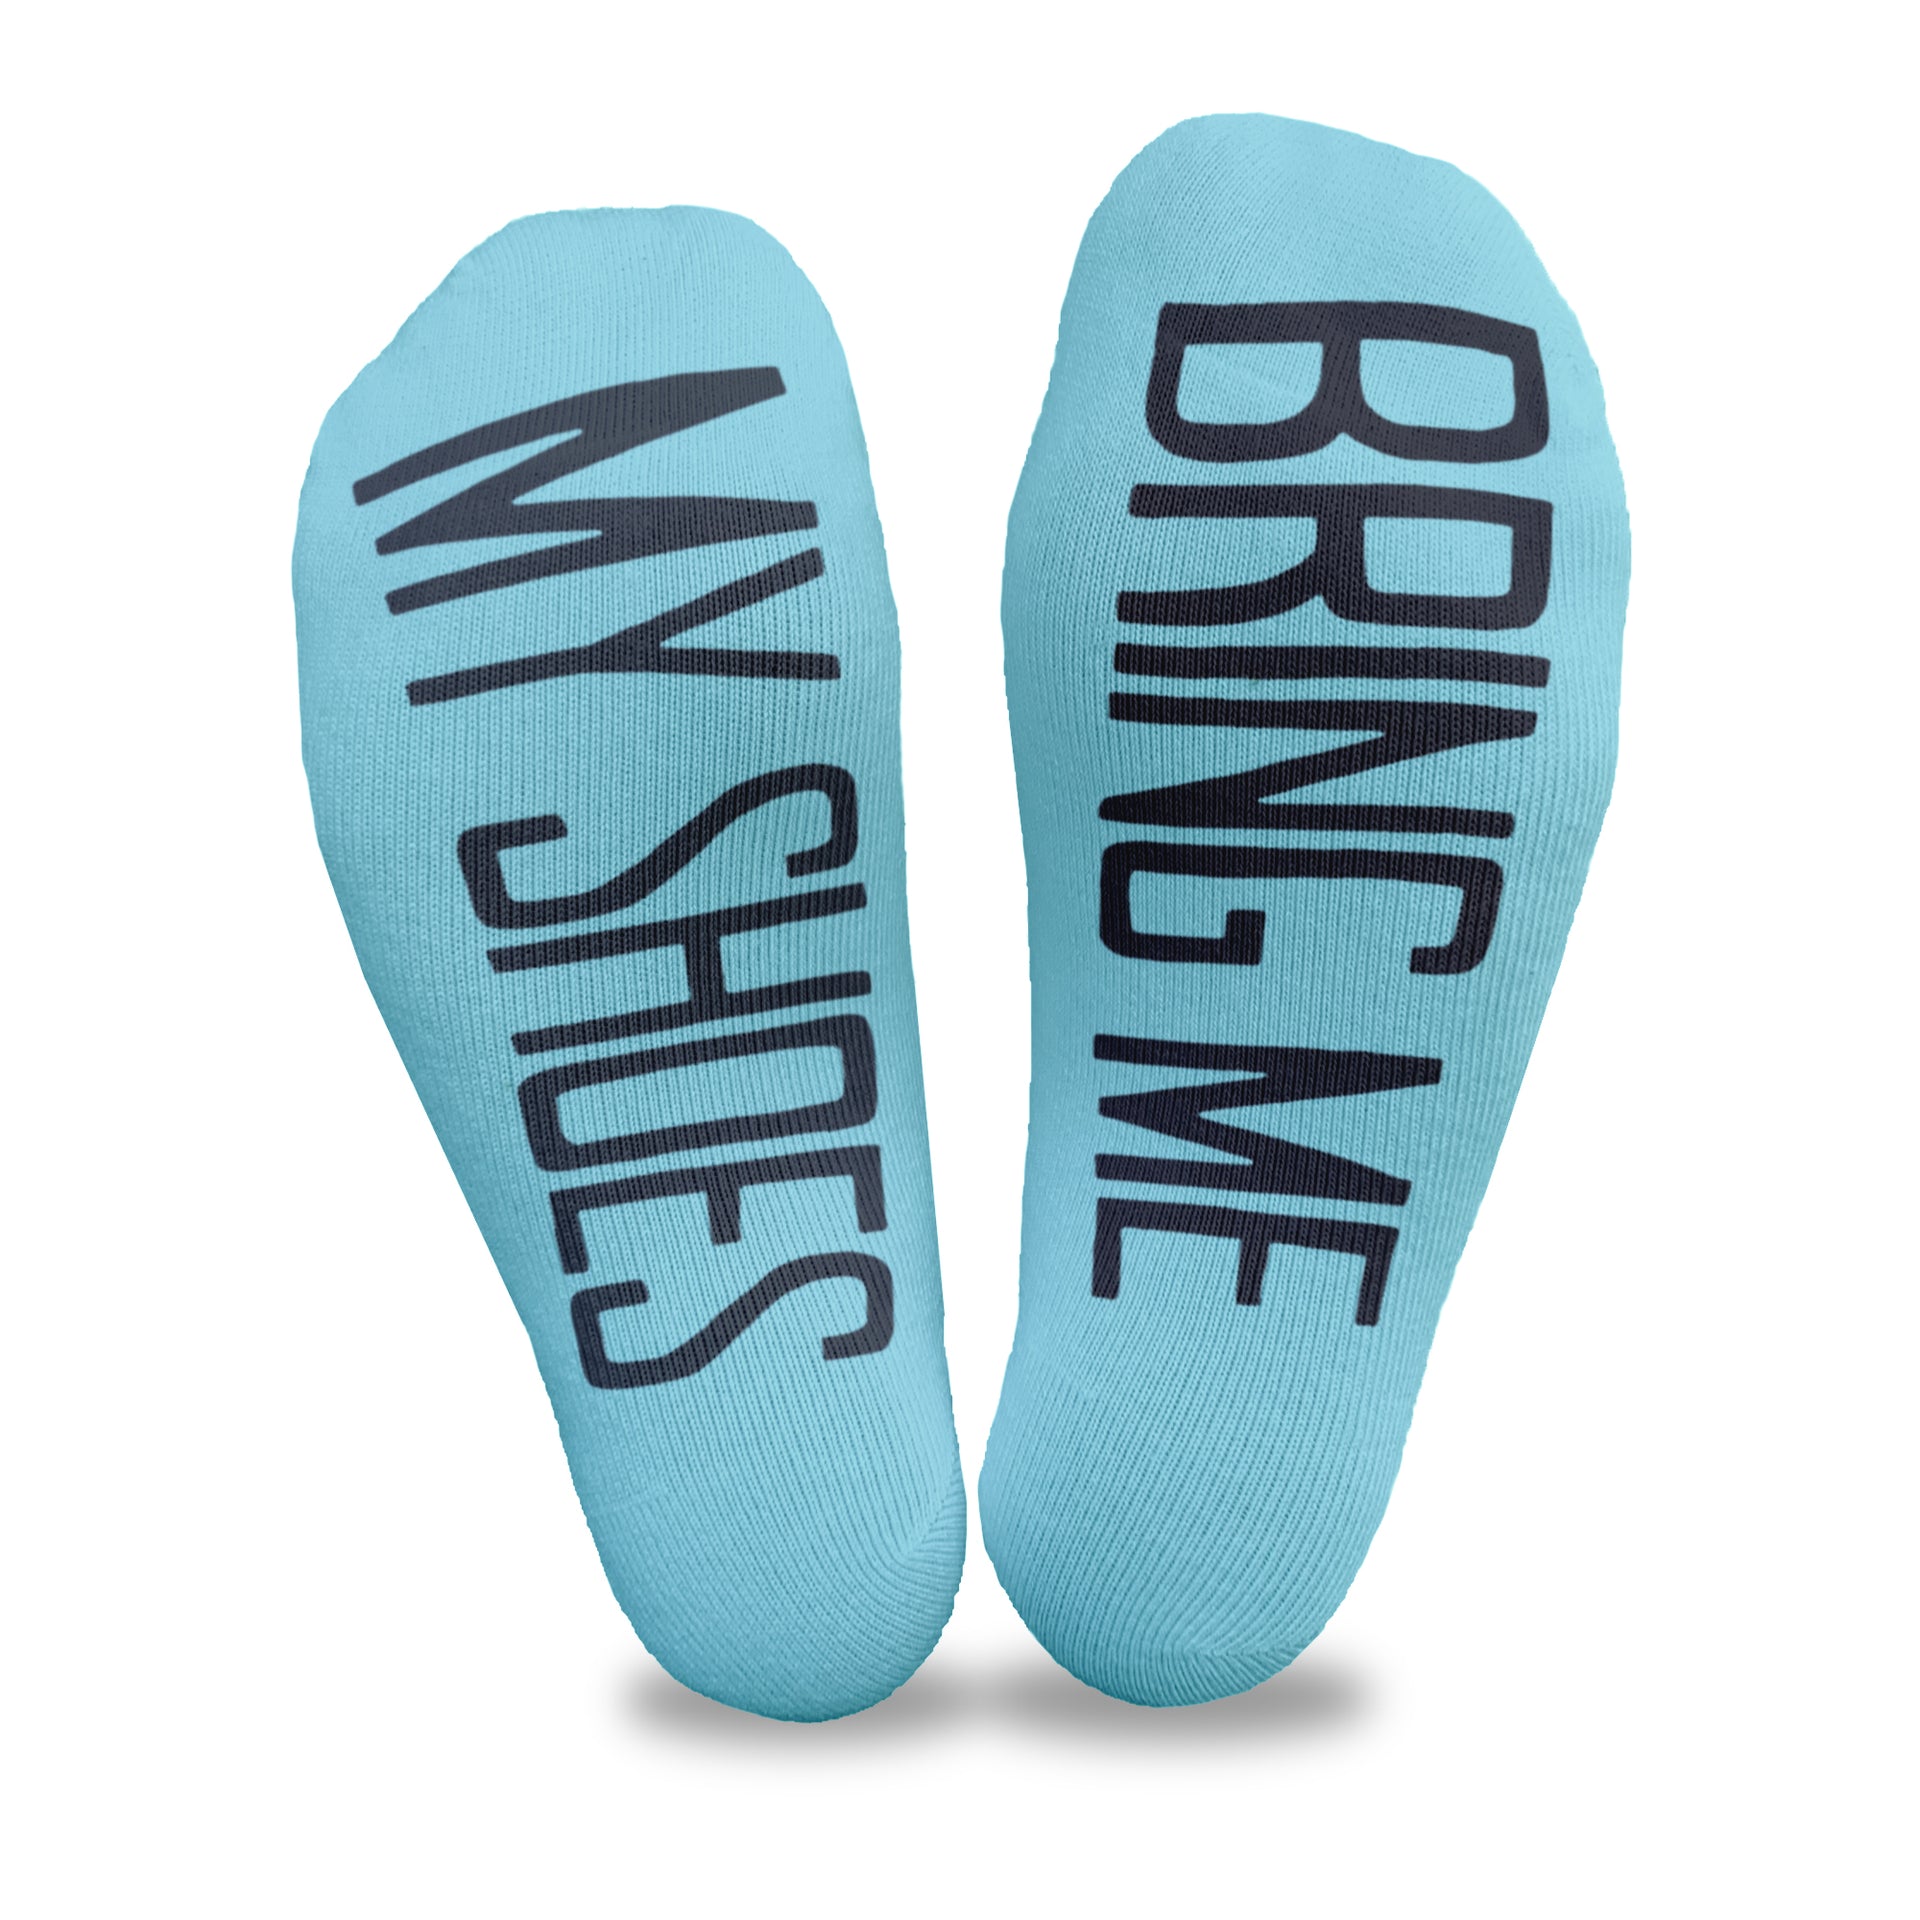 Bring me my shoes custom printed on the soles of cotton turquoise no show socks is an attention getter with your family.